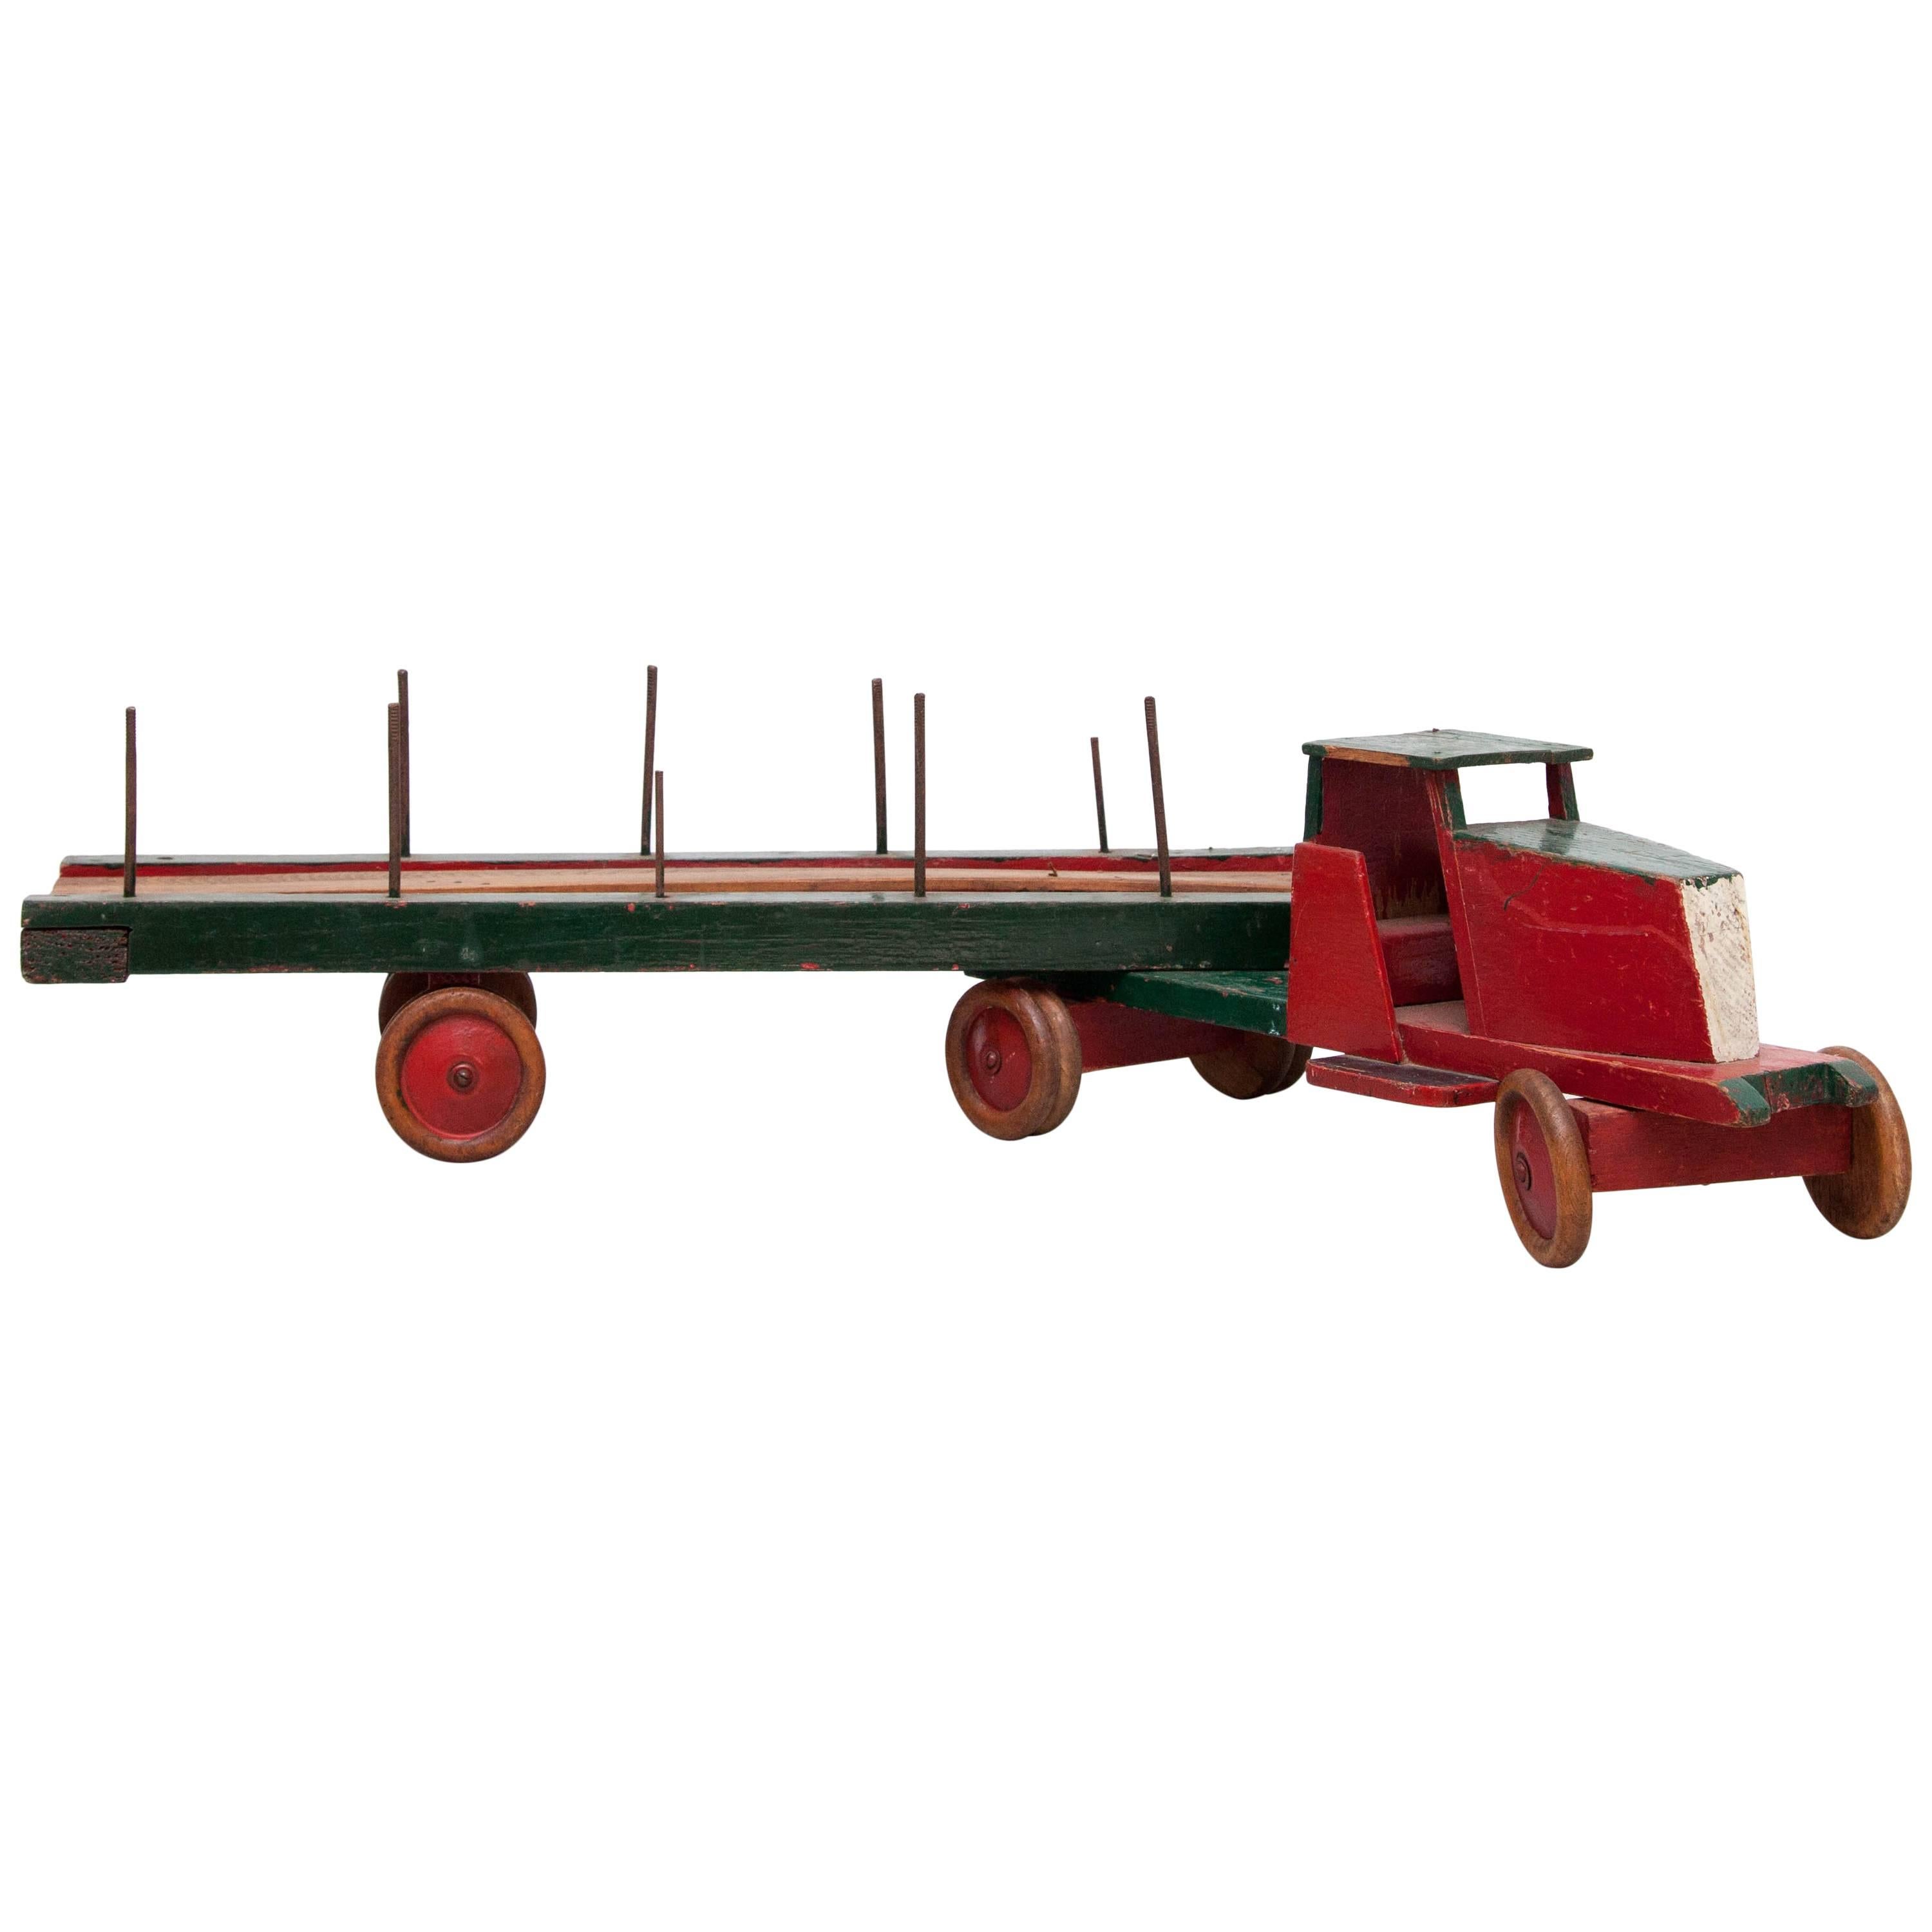 Toy designed by Ko Verzuu, circa 1940.
Manufactured by ADO in Netherlands.

Truck & trailer of wood 